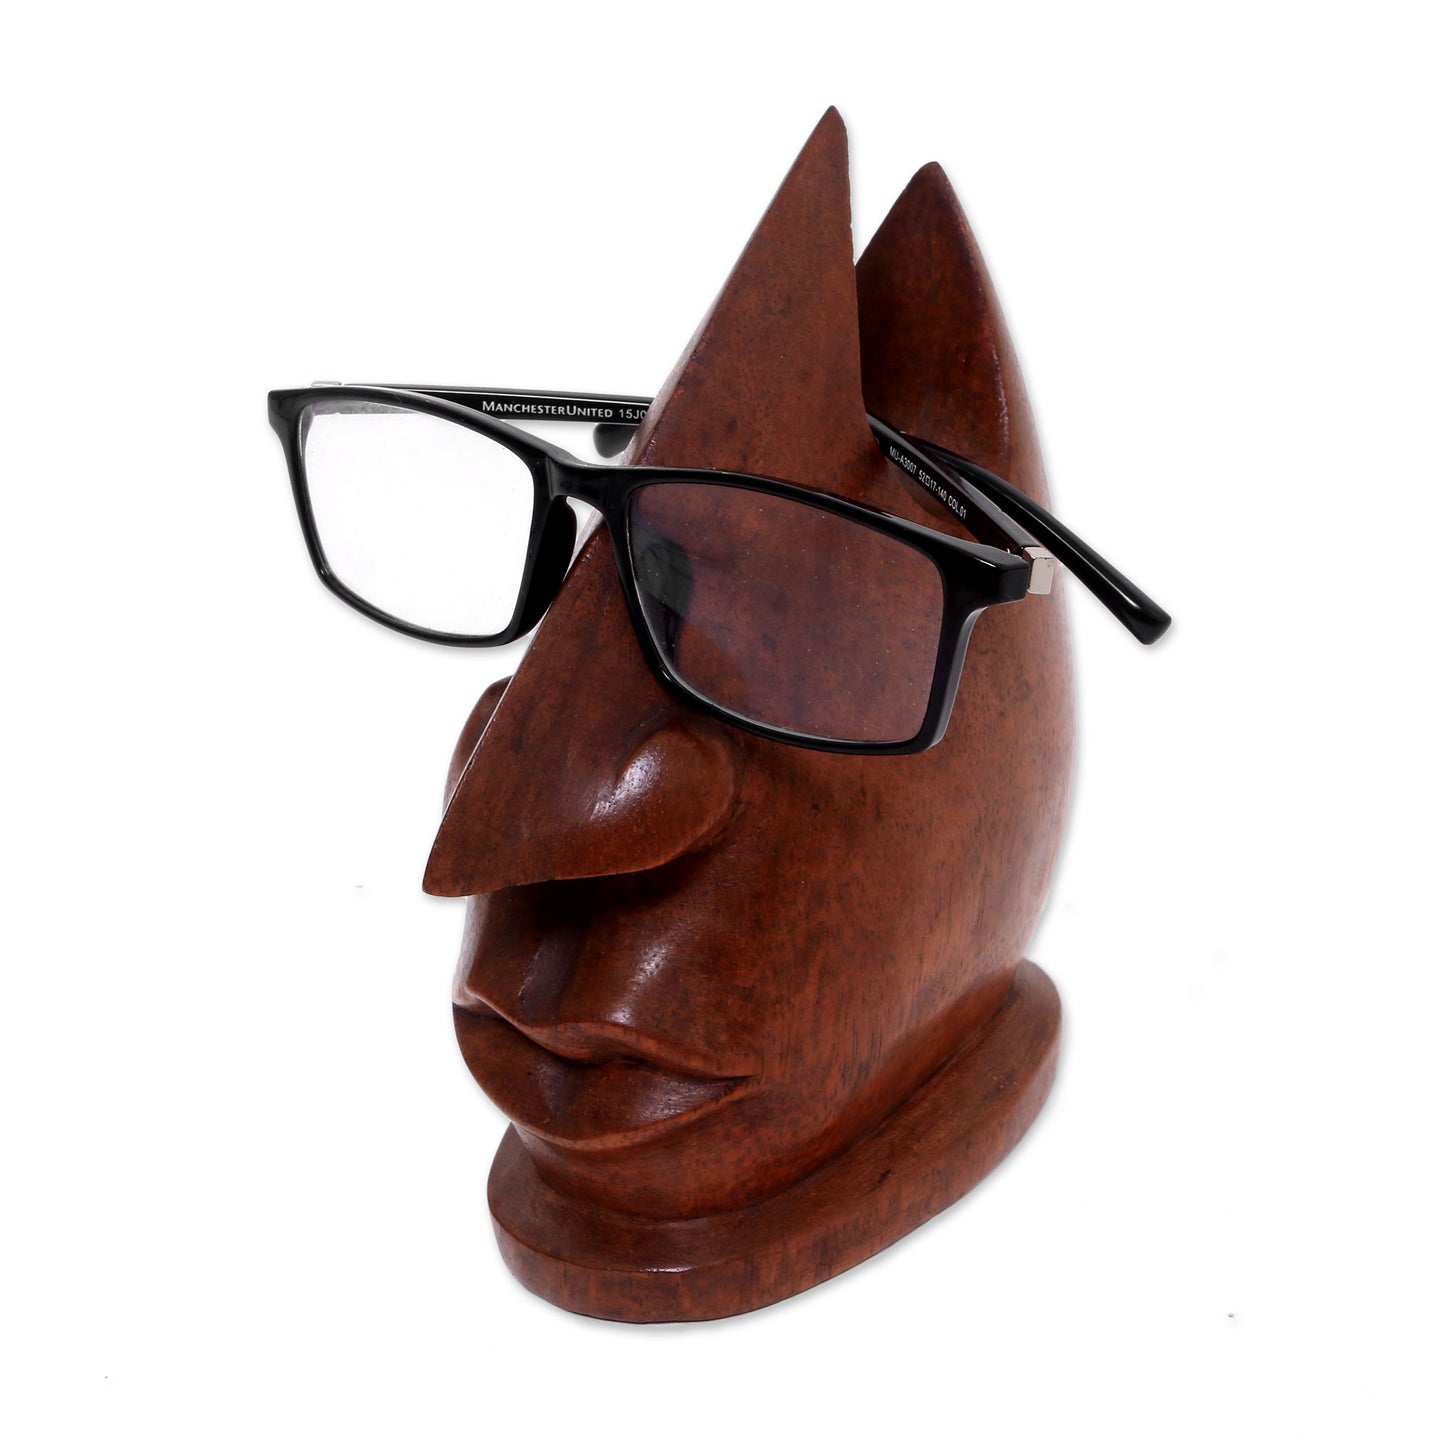 Prominent Nose in Light Brown Wood Eyeglasses Stand in Light Brown from Bali